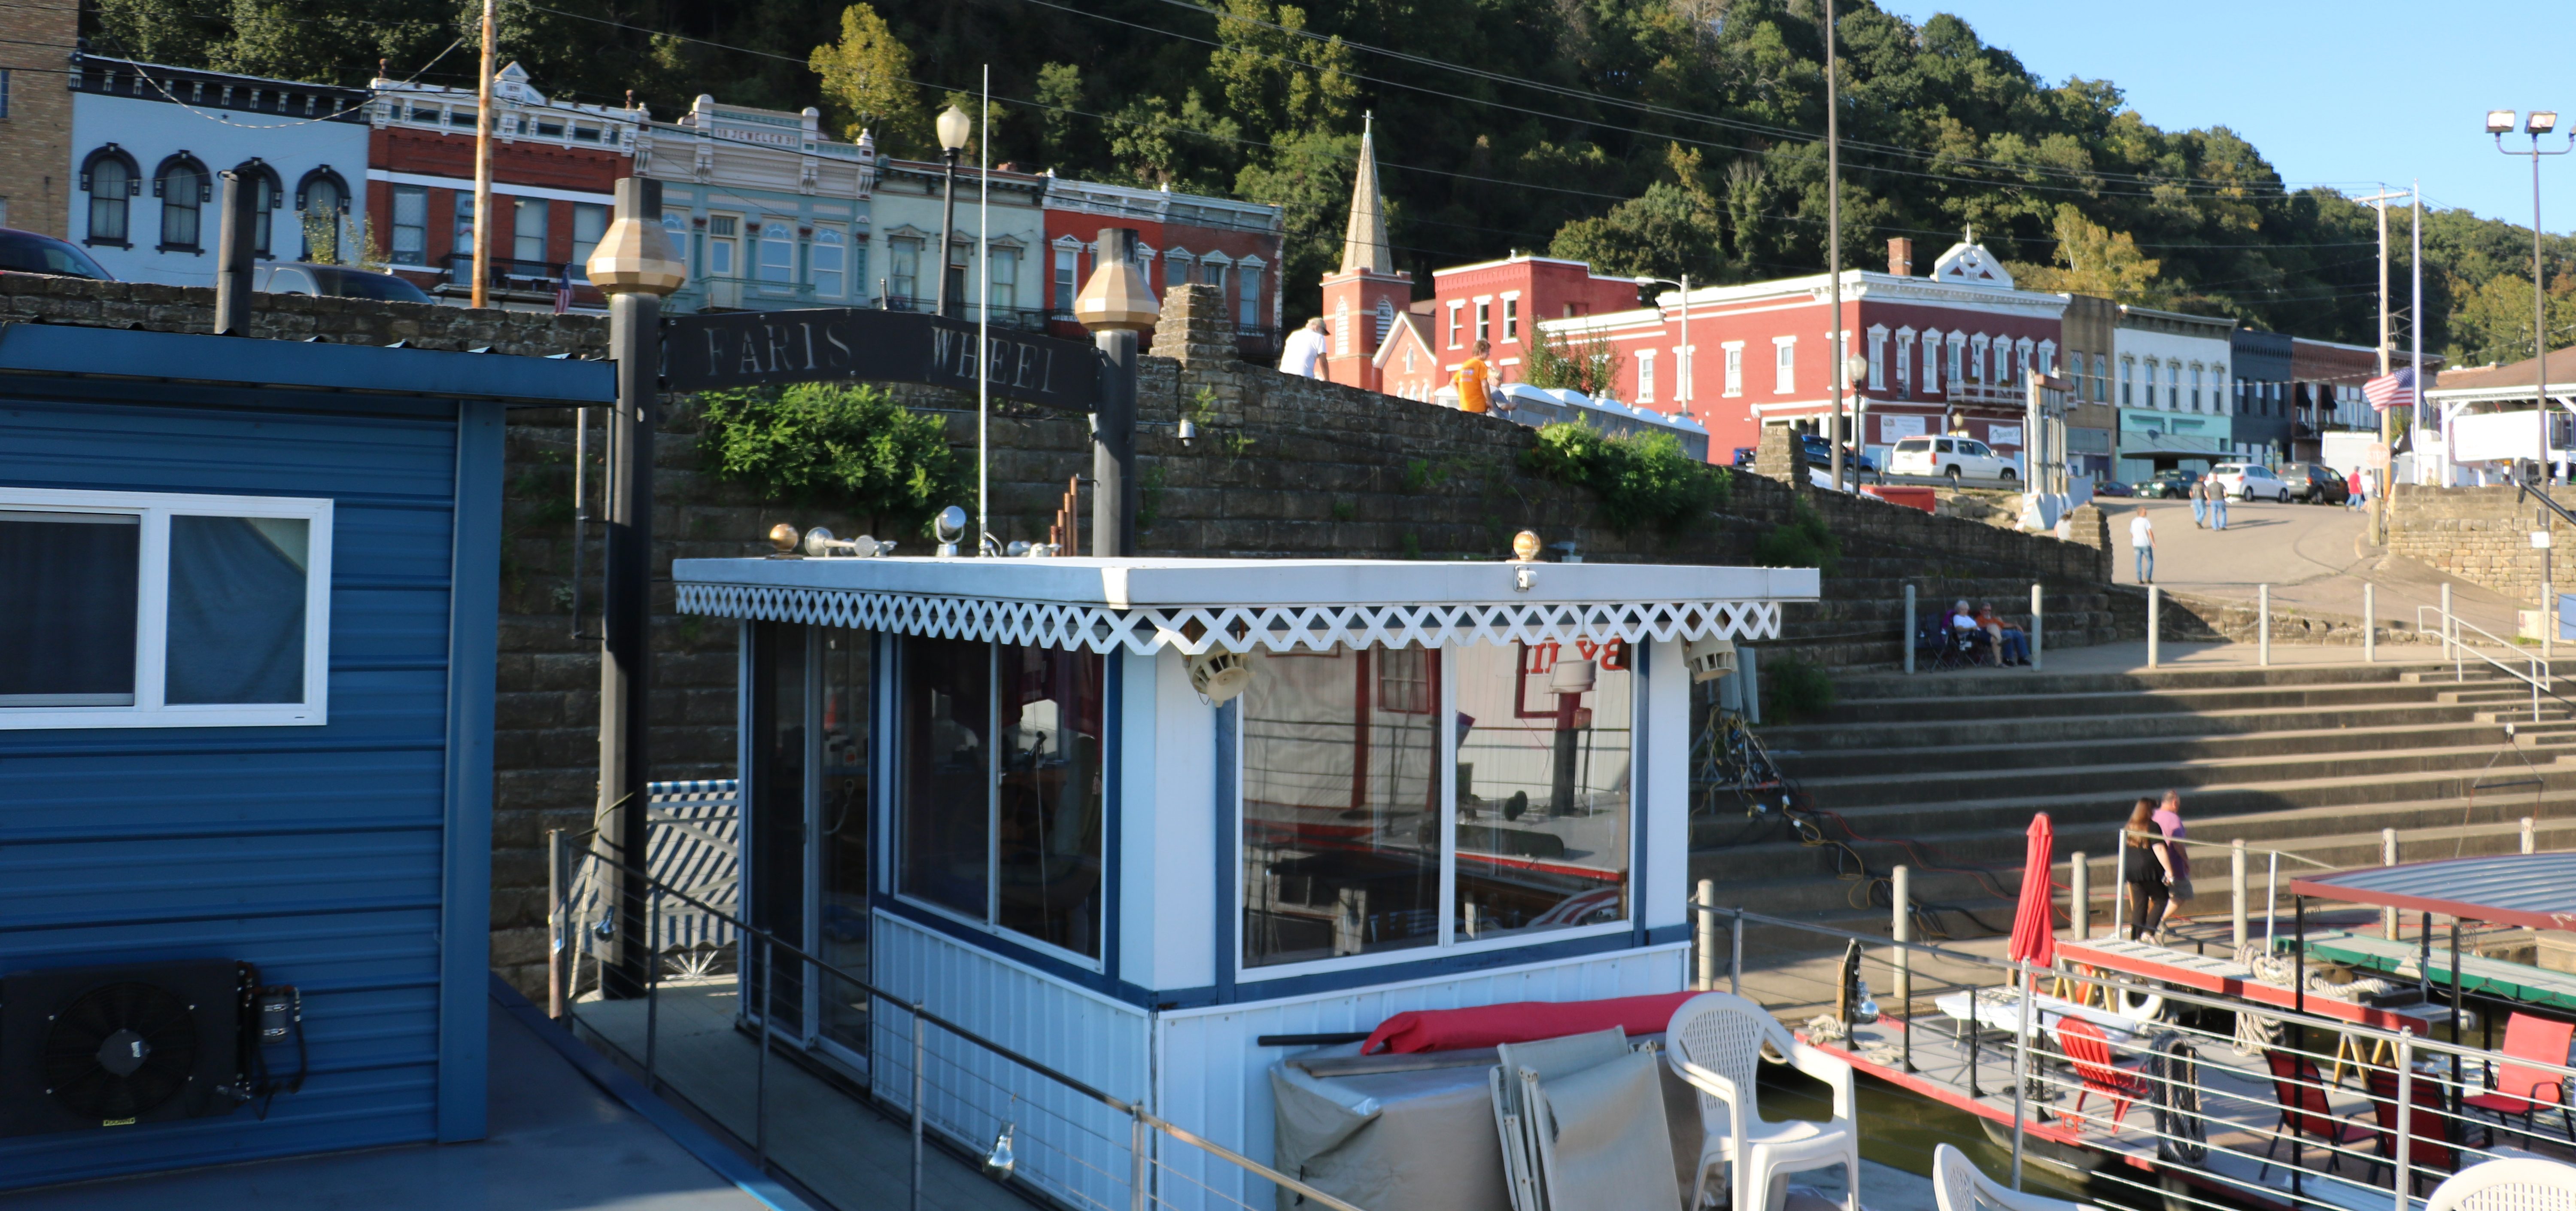 Overlooking Pomeroy's downtown riverfront and Main Street from atop a sternwheel, the William D.